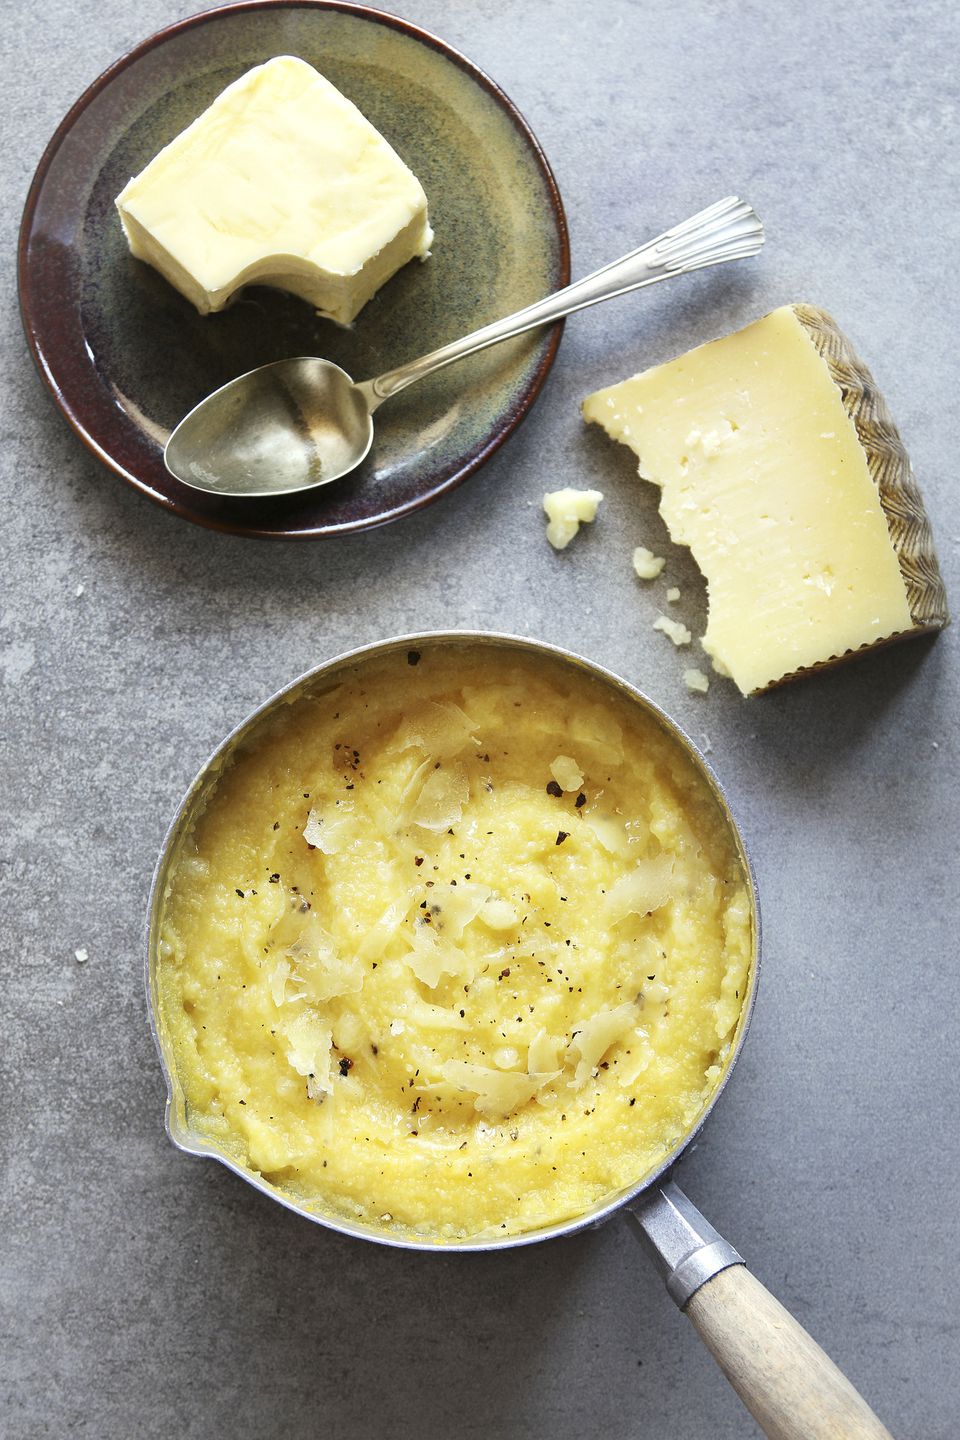 A Polenta Recipe With Parmesan and Ricotta